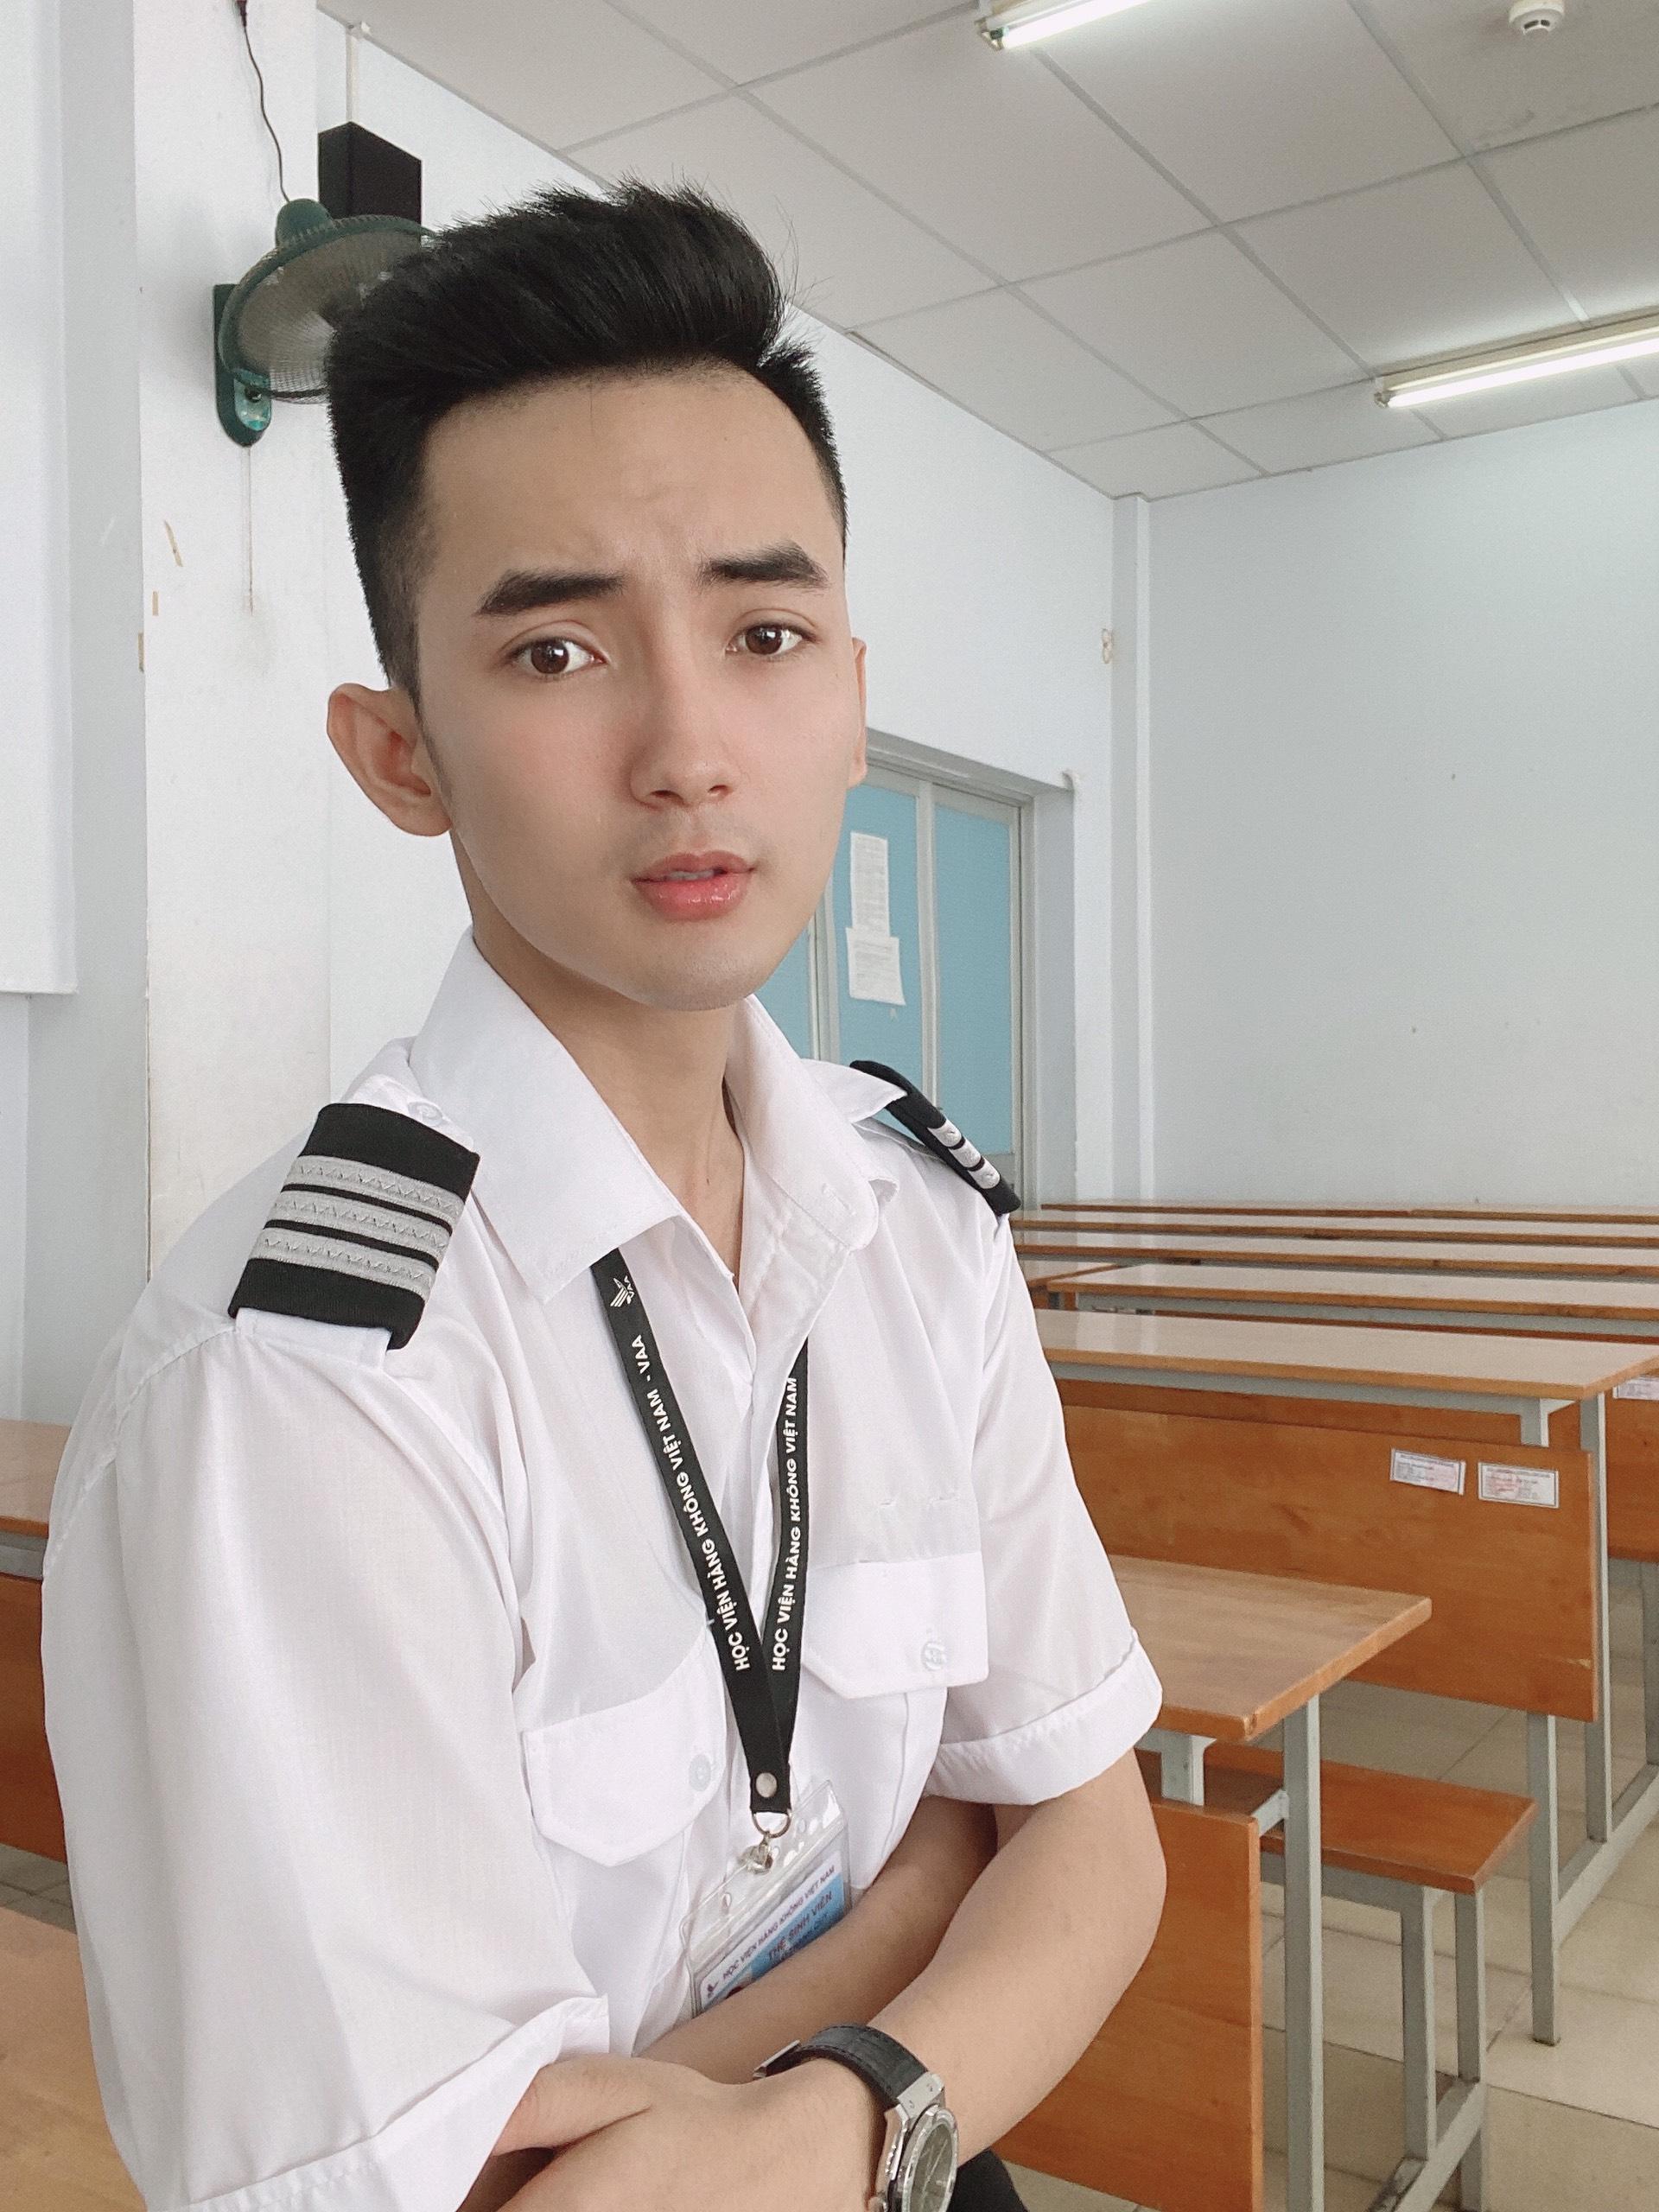  Thai Thanh Quy is handsome in the uniform of the Aviation Academy